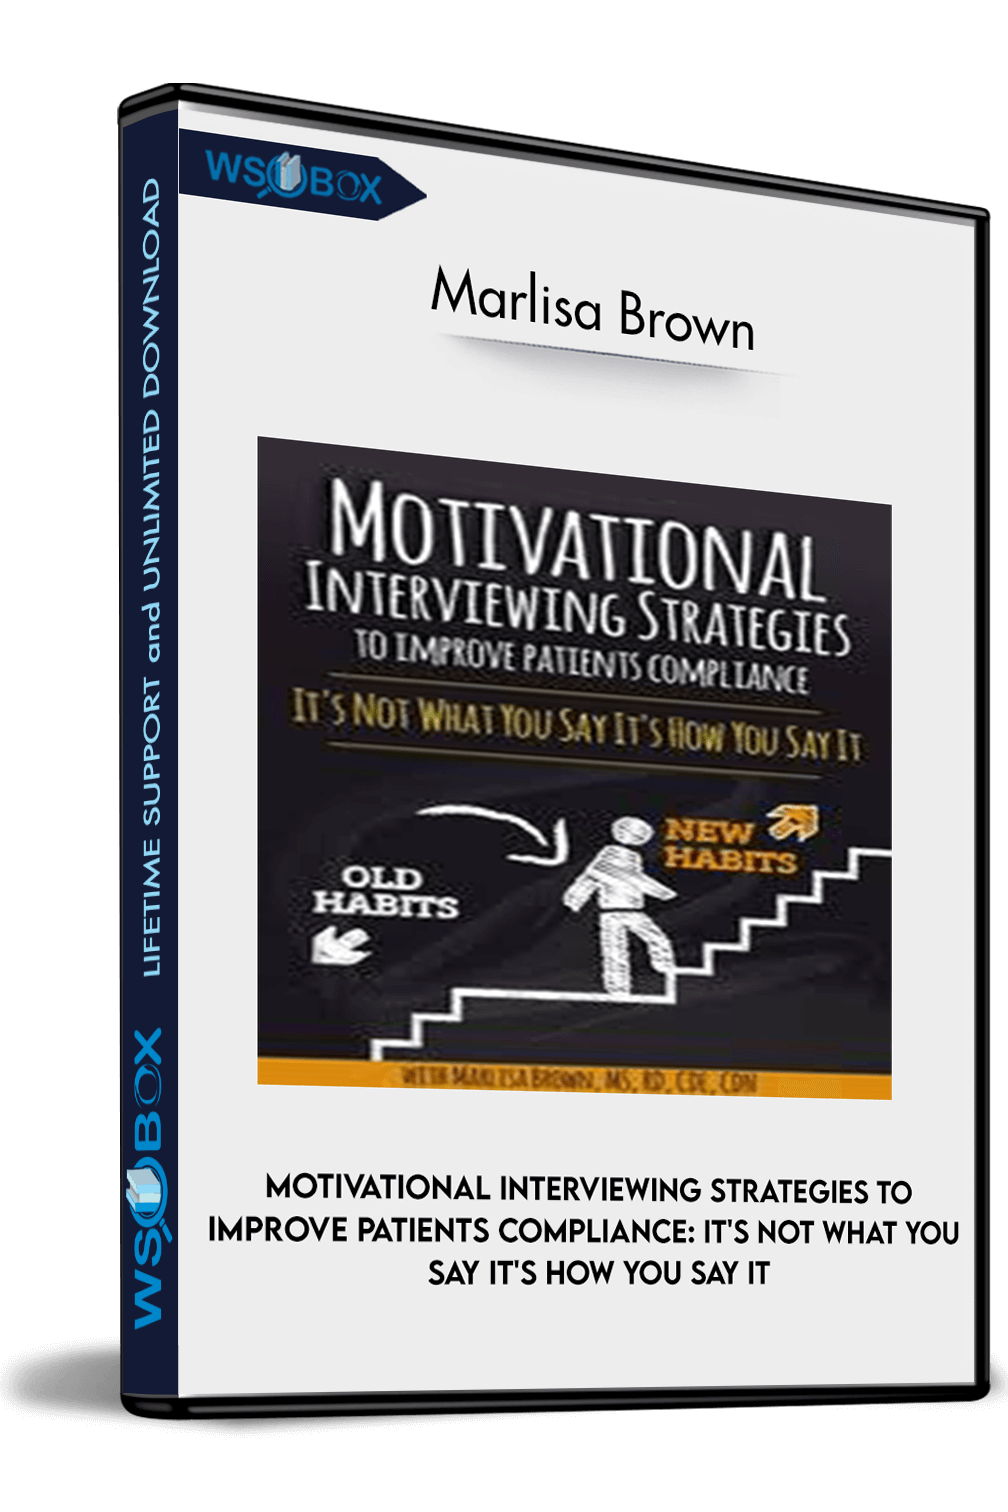 Motivational Interviewing Strategies to Improve Patients Compliance: It’s Not What You Say It’s How You Say It – Marlisa Brown